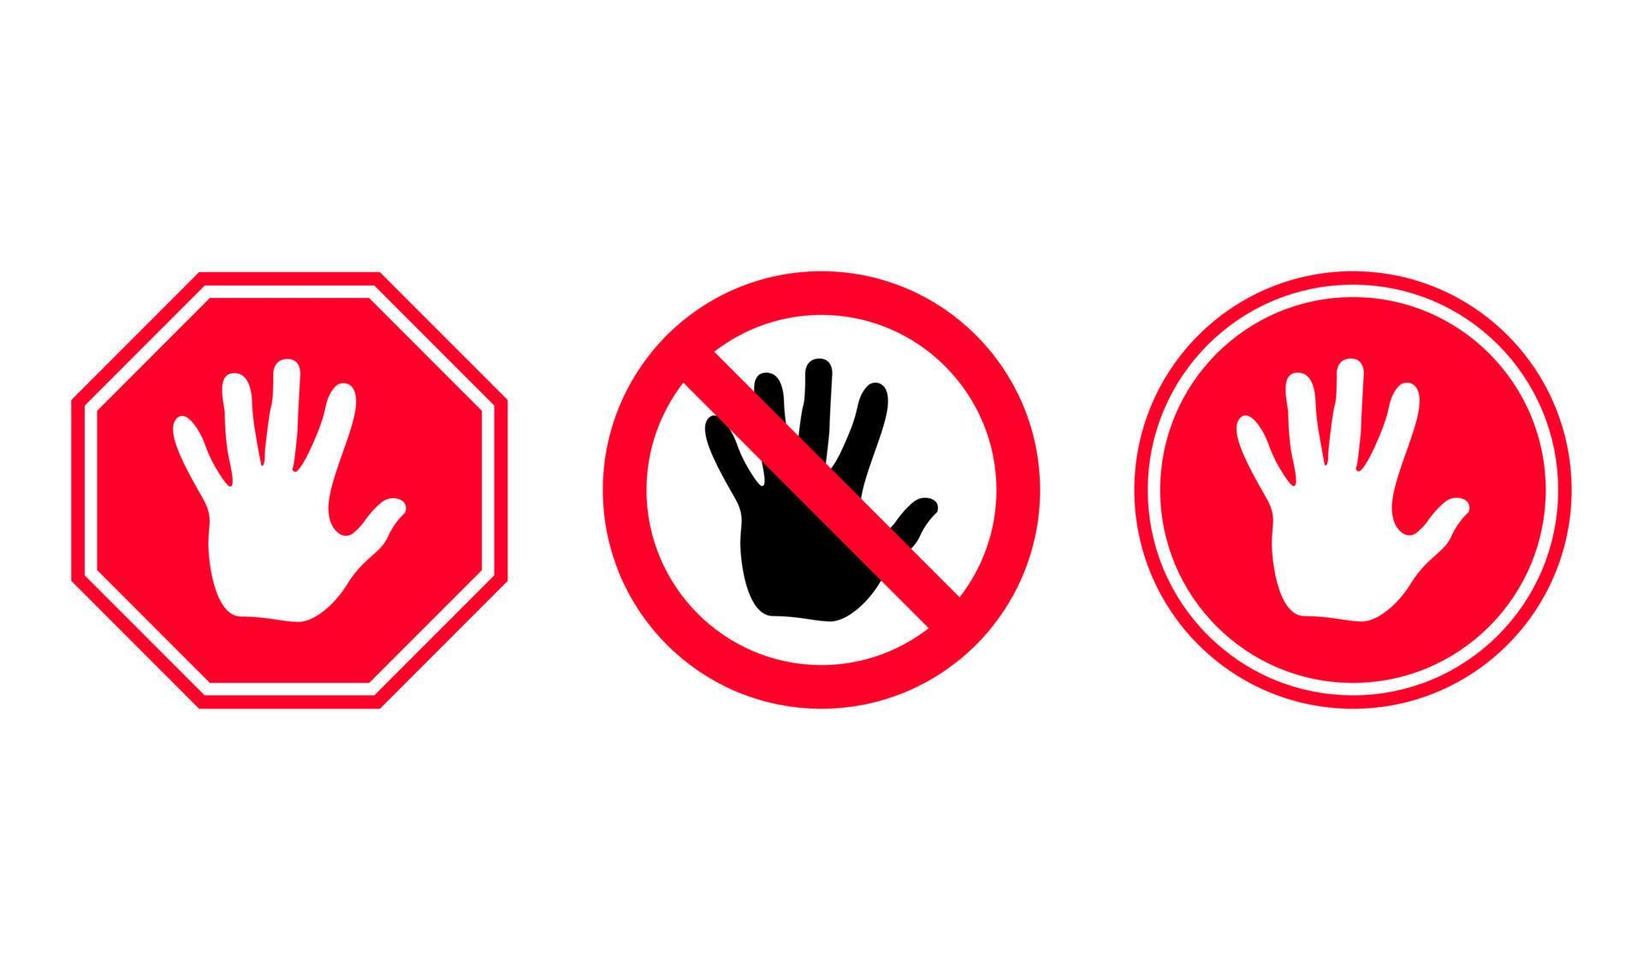 Set simple red stop sign with big hand symbol on different road sign on white background. Palm icon vector